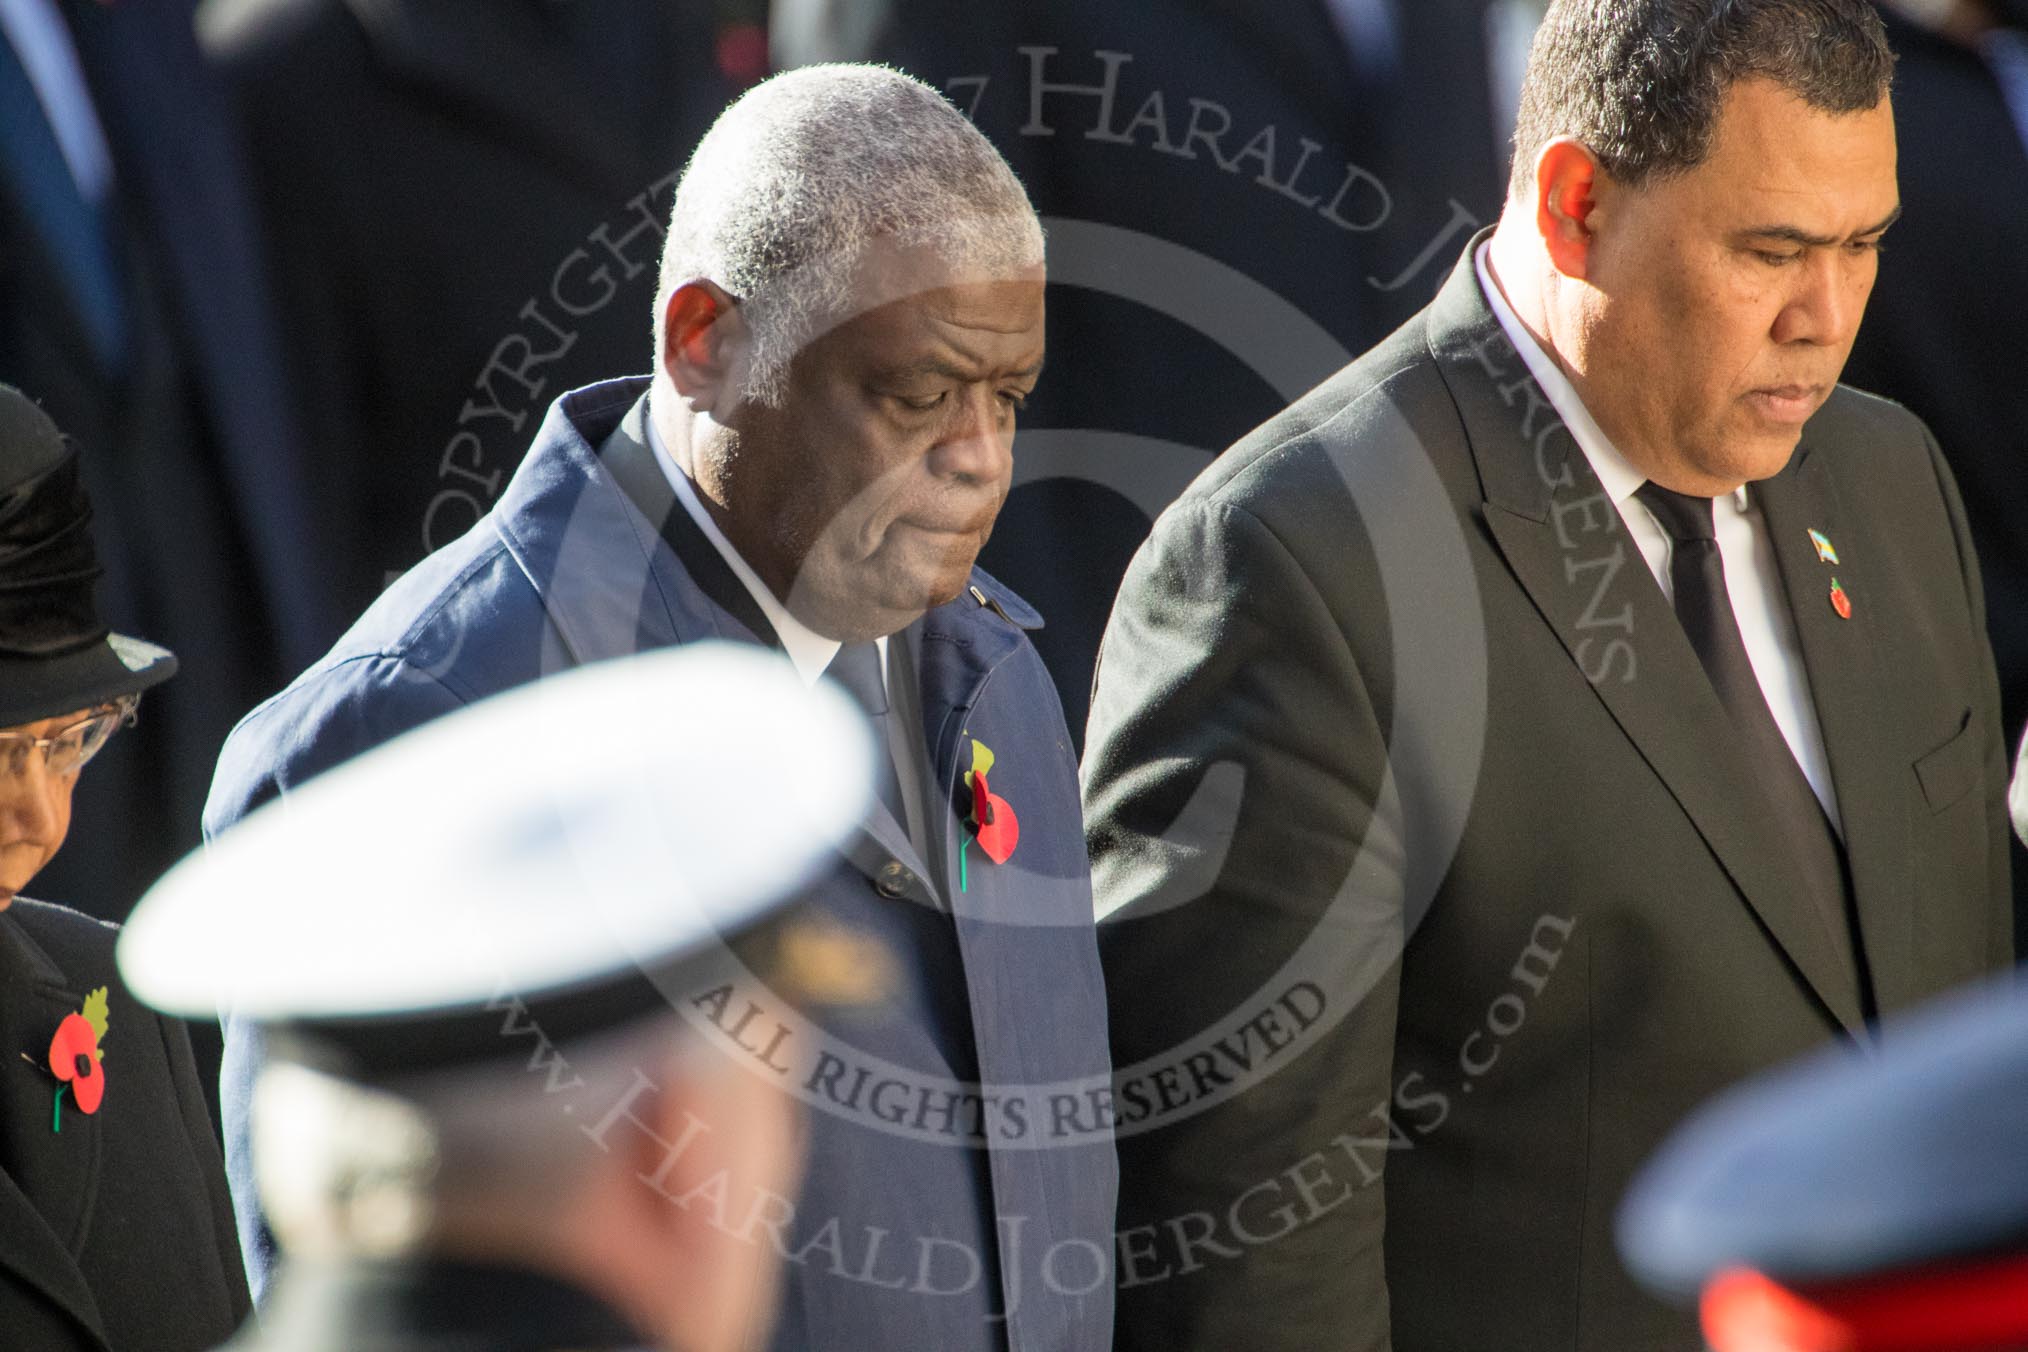 The Charge' d' Affaires for The Grenada High Commission, Samuel Sandy, and  the  High Commissioner of The Bahamas, Ellison Edroy Greenslade, during Remembrance Sunday Cenotaph Ceremony 2018 at Horse Guards Parade, Westminster, London, 11 November 2018, 11:14.